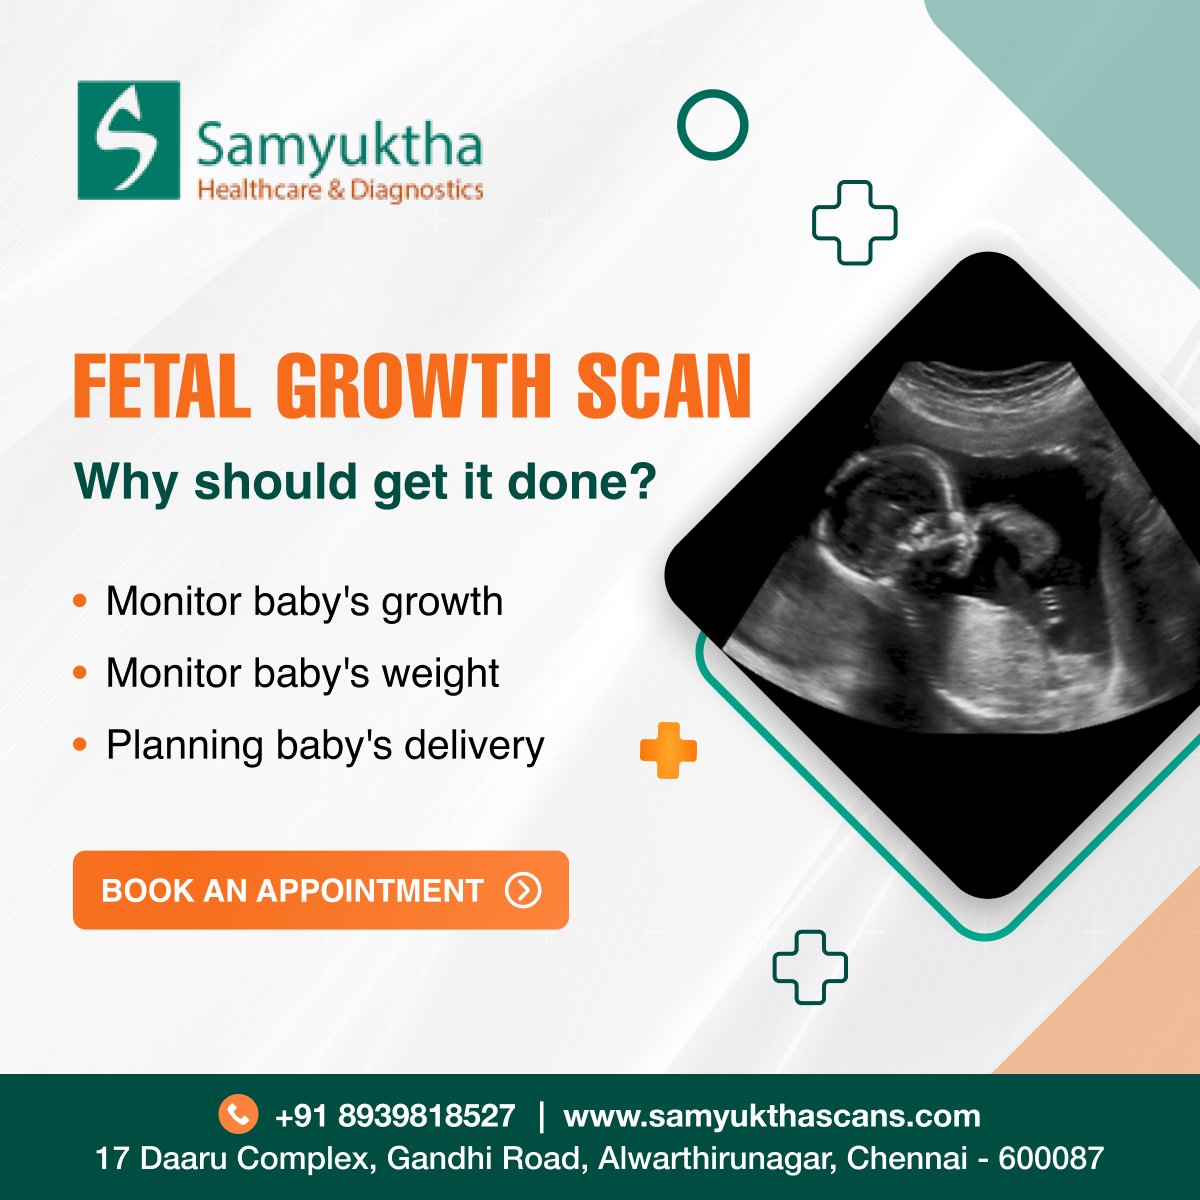 Keep track of your little one's growth with a Fetal Growth Scan! 🌟

Contact Us: +91 8939818527
WhatsApp Us: wa.link/pp5i1l

#FetalHealth #BabyGrowth #PrenatalCare #FetalGrowthScan #PregnancyMonitoring #BabyDevelopment #UltrasoundCheckup #HealthyPregnancy #Pregnancy